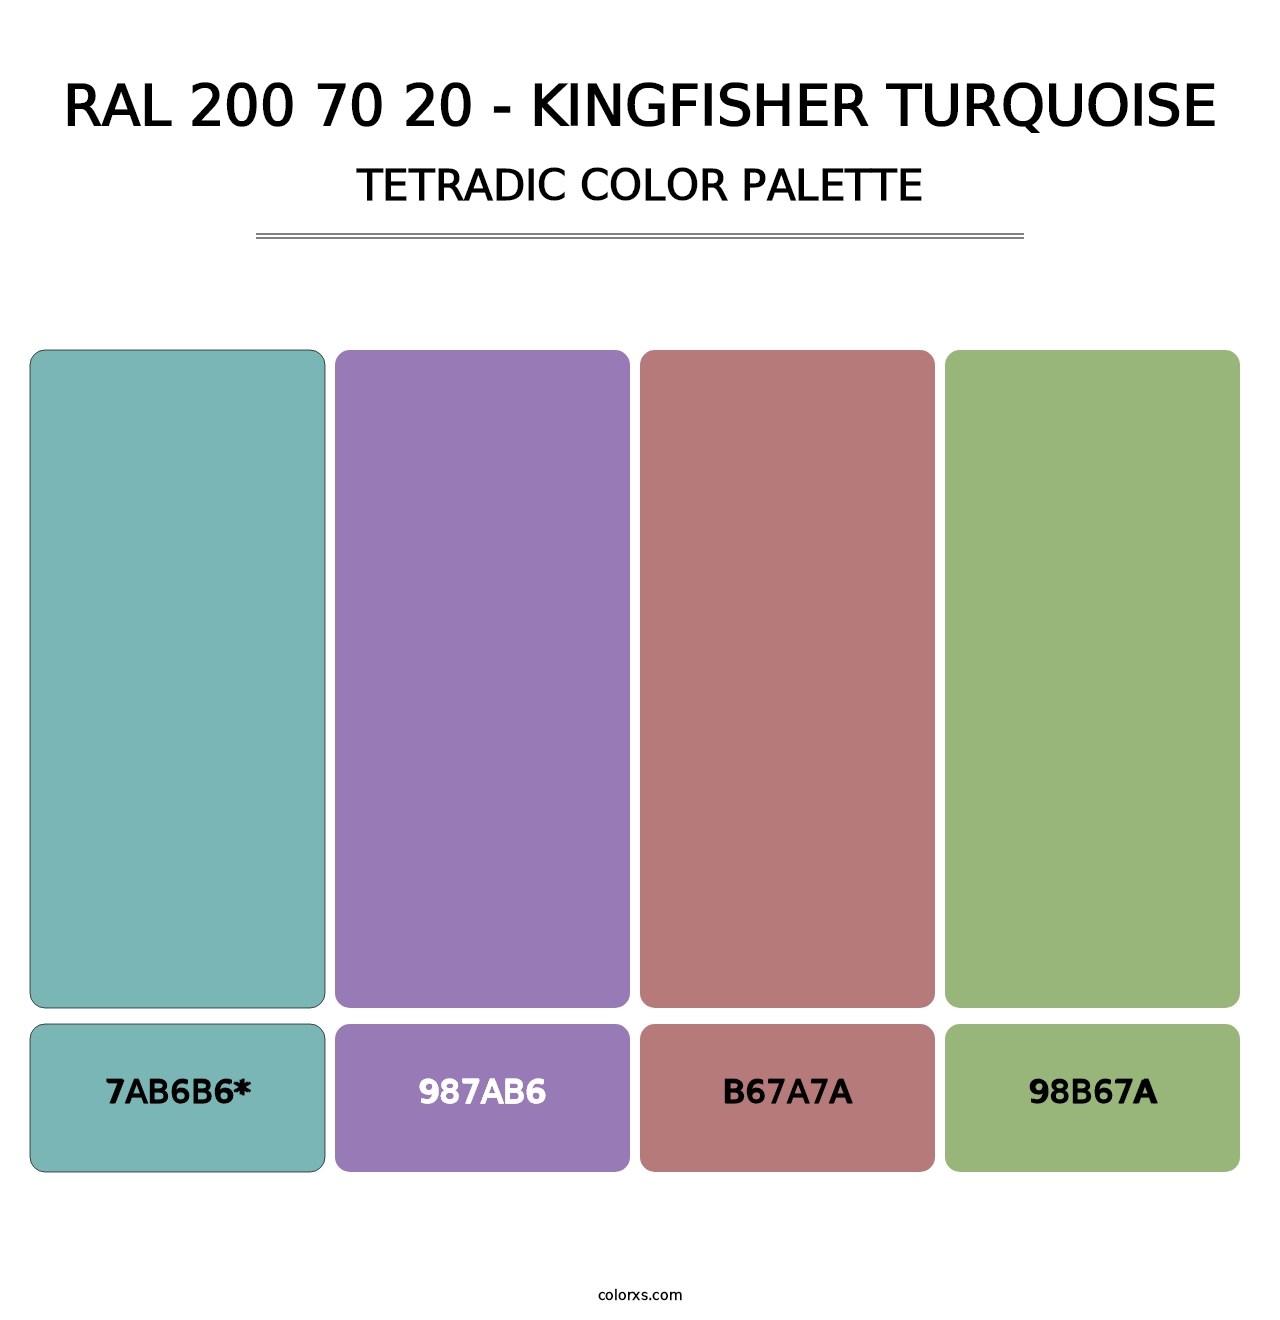 RAL 200 70 20 - Kingfisher Turquoise - Tetradic Color Palette